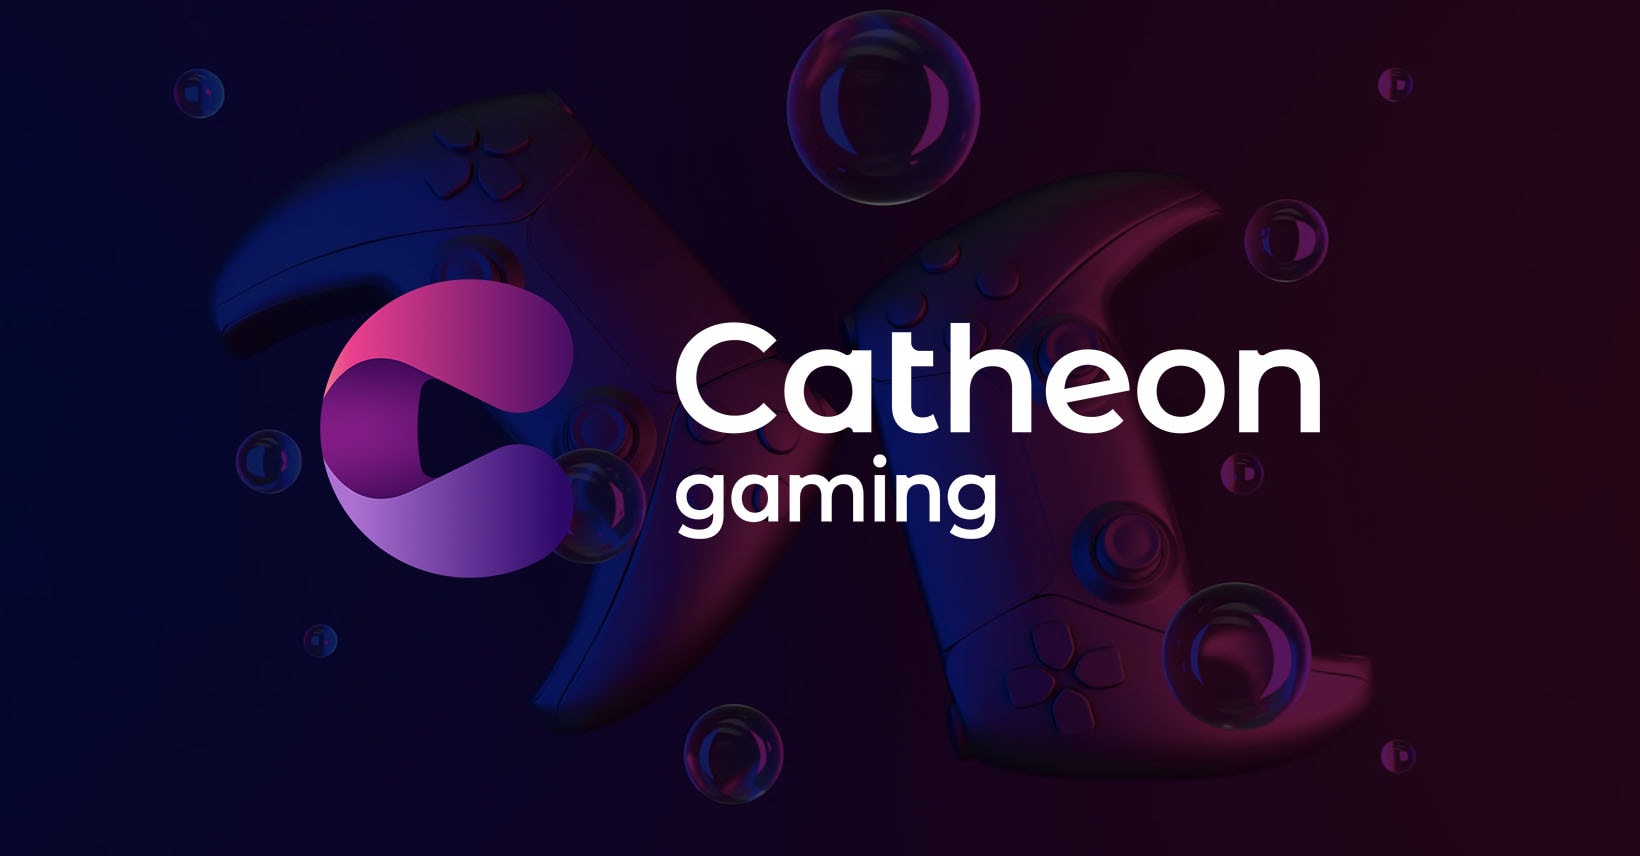 Catheon Gaming Has 25 Blockchain Games, 50 Million Downloads, And Huge Plans